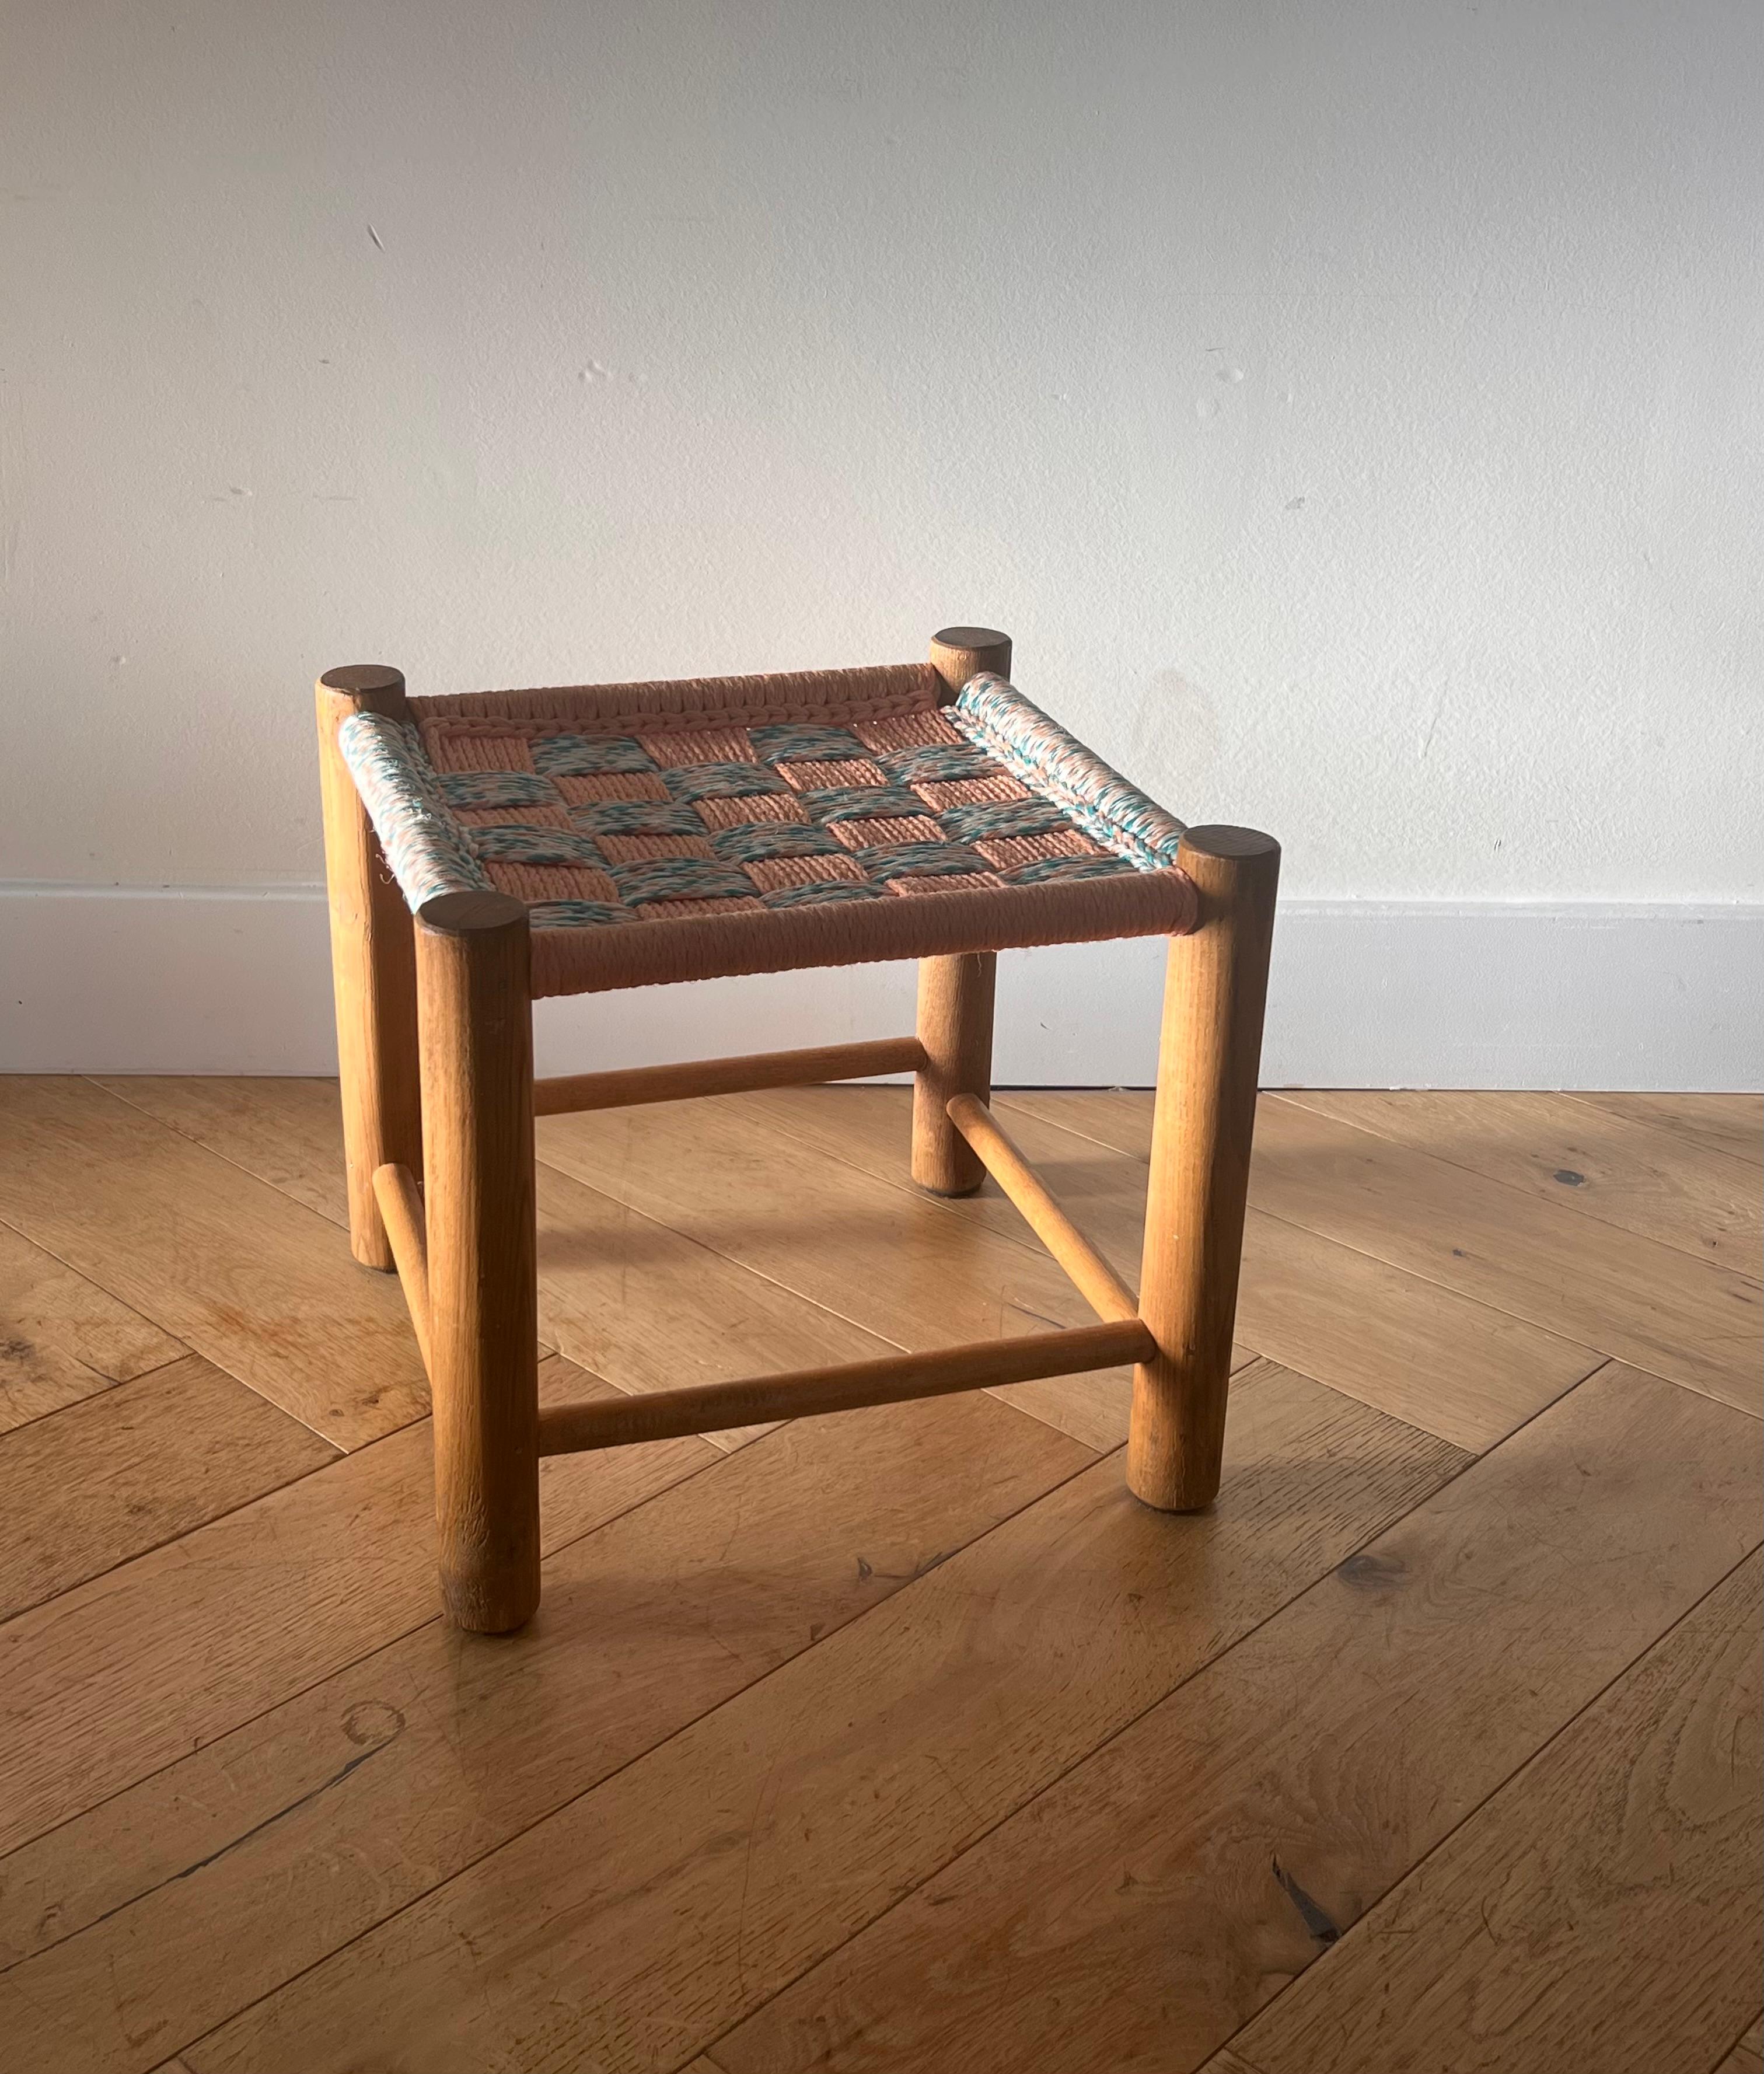 Mid century modern Perriand style wooden stool with woven seat, 1950s For Sale 1